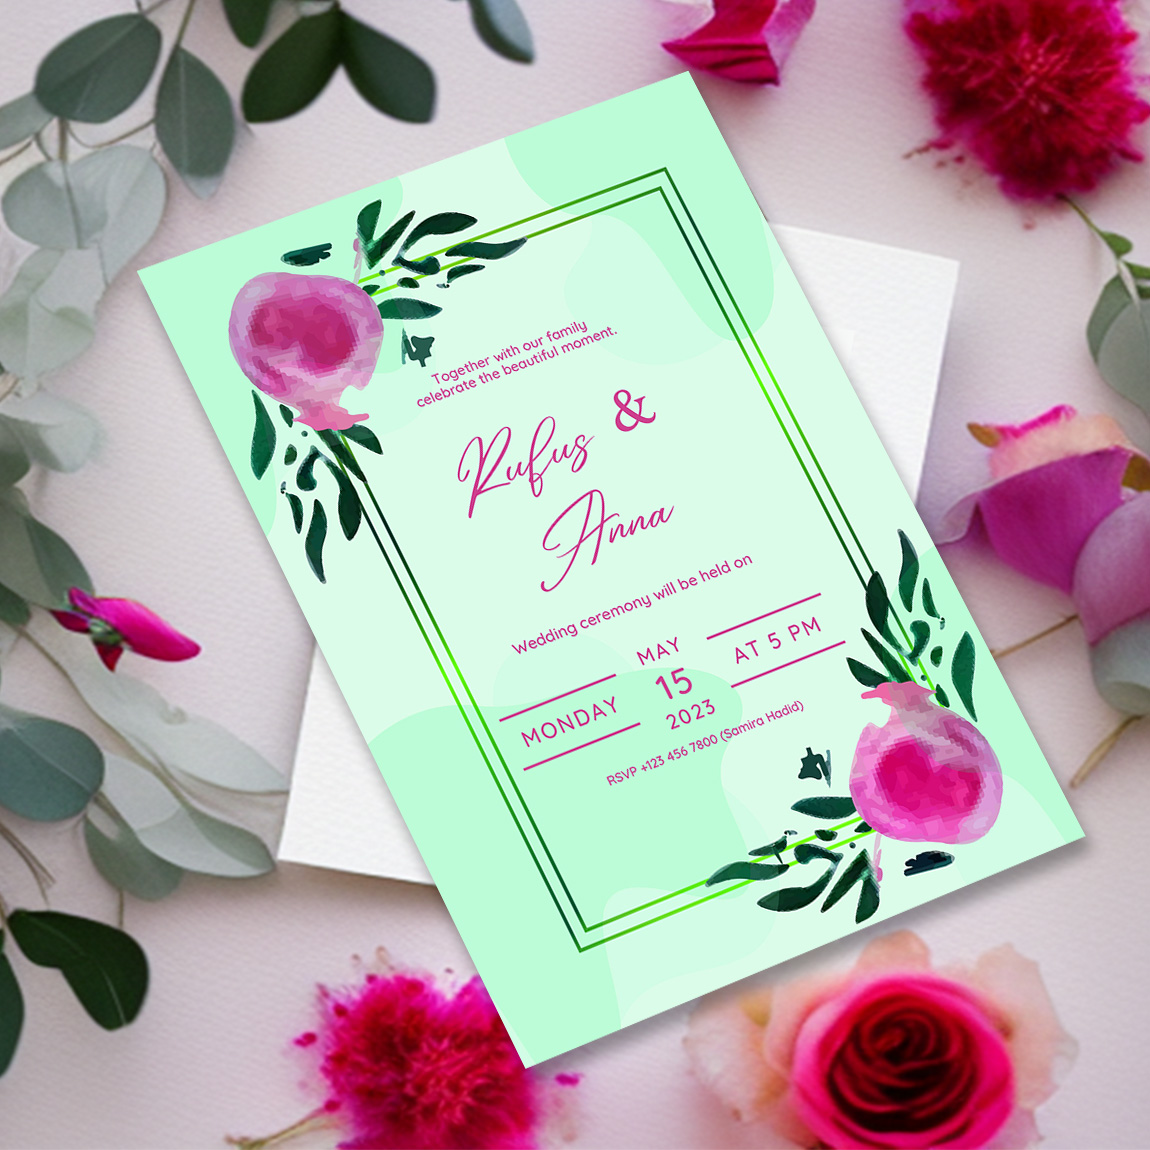 Image with irresistible wedding invitation card with watercolor flowers.